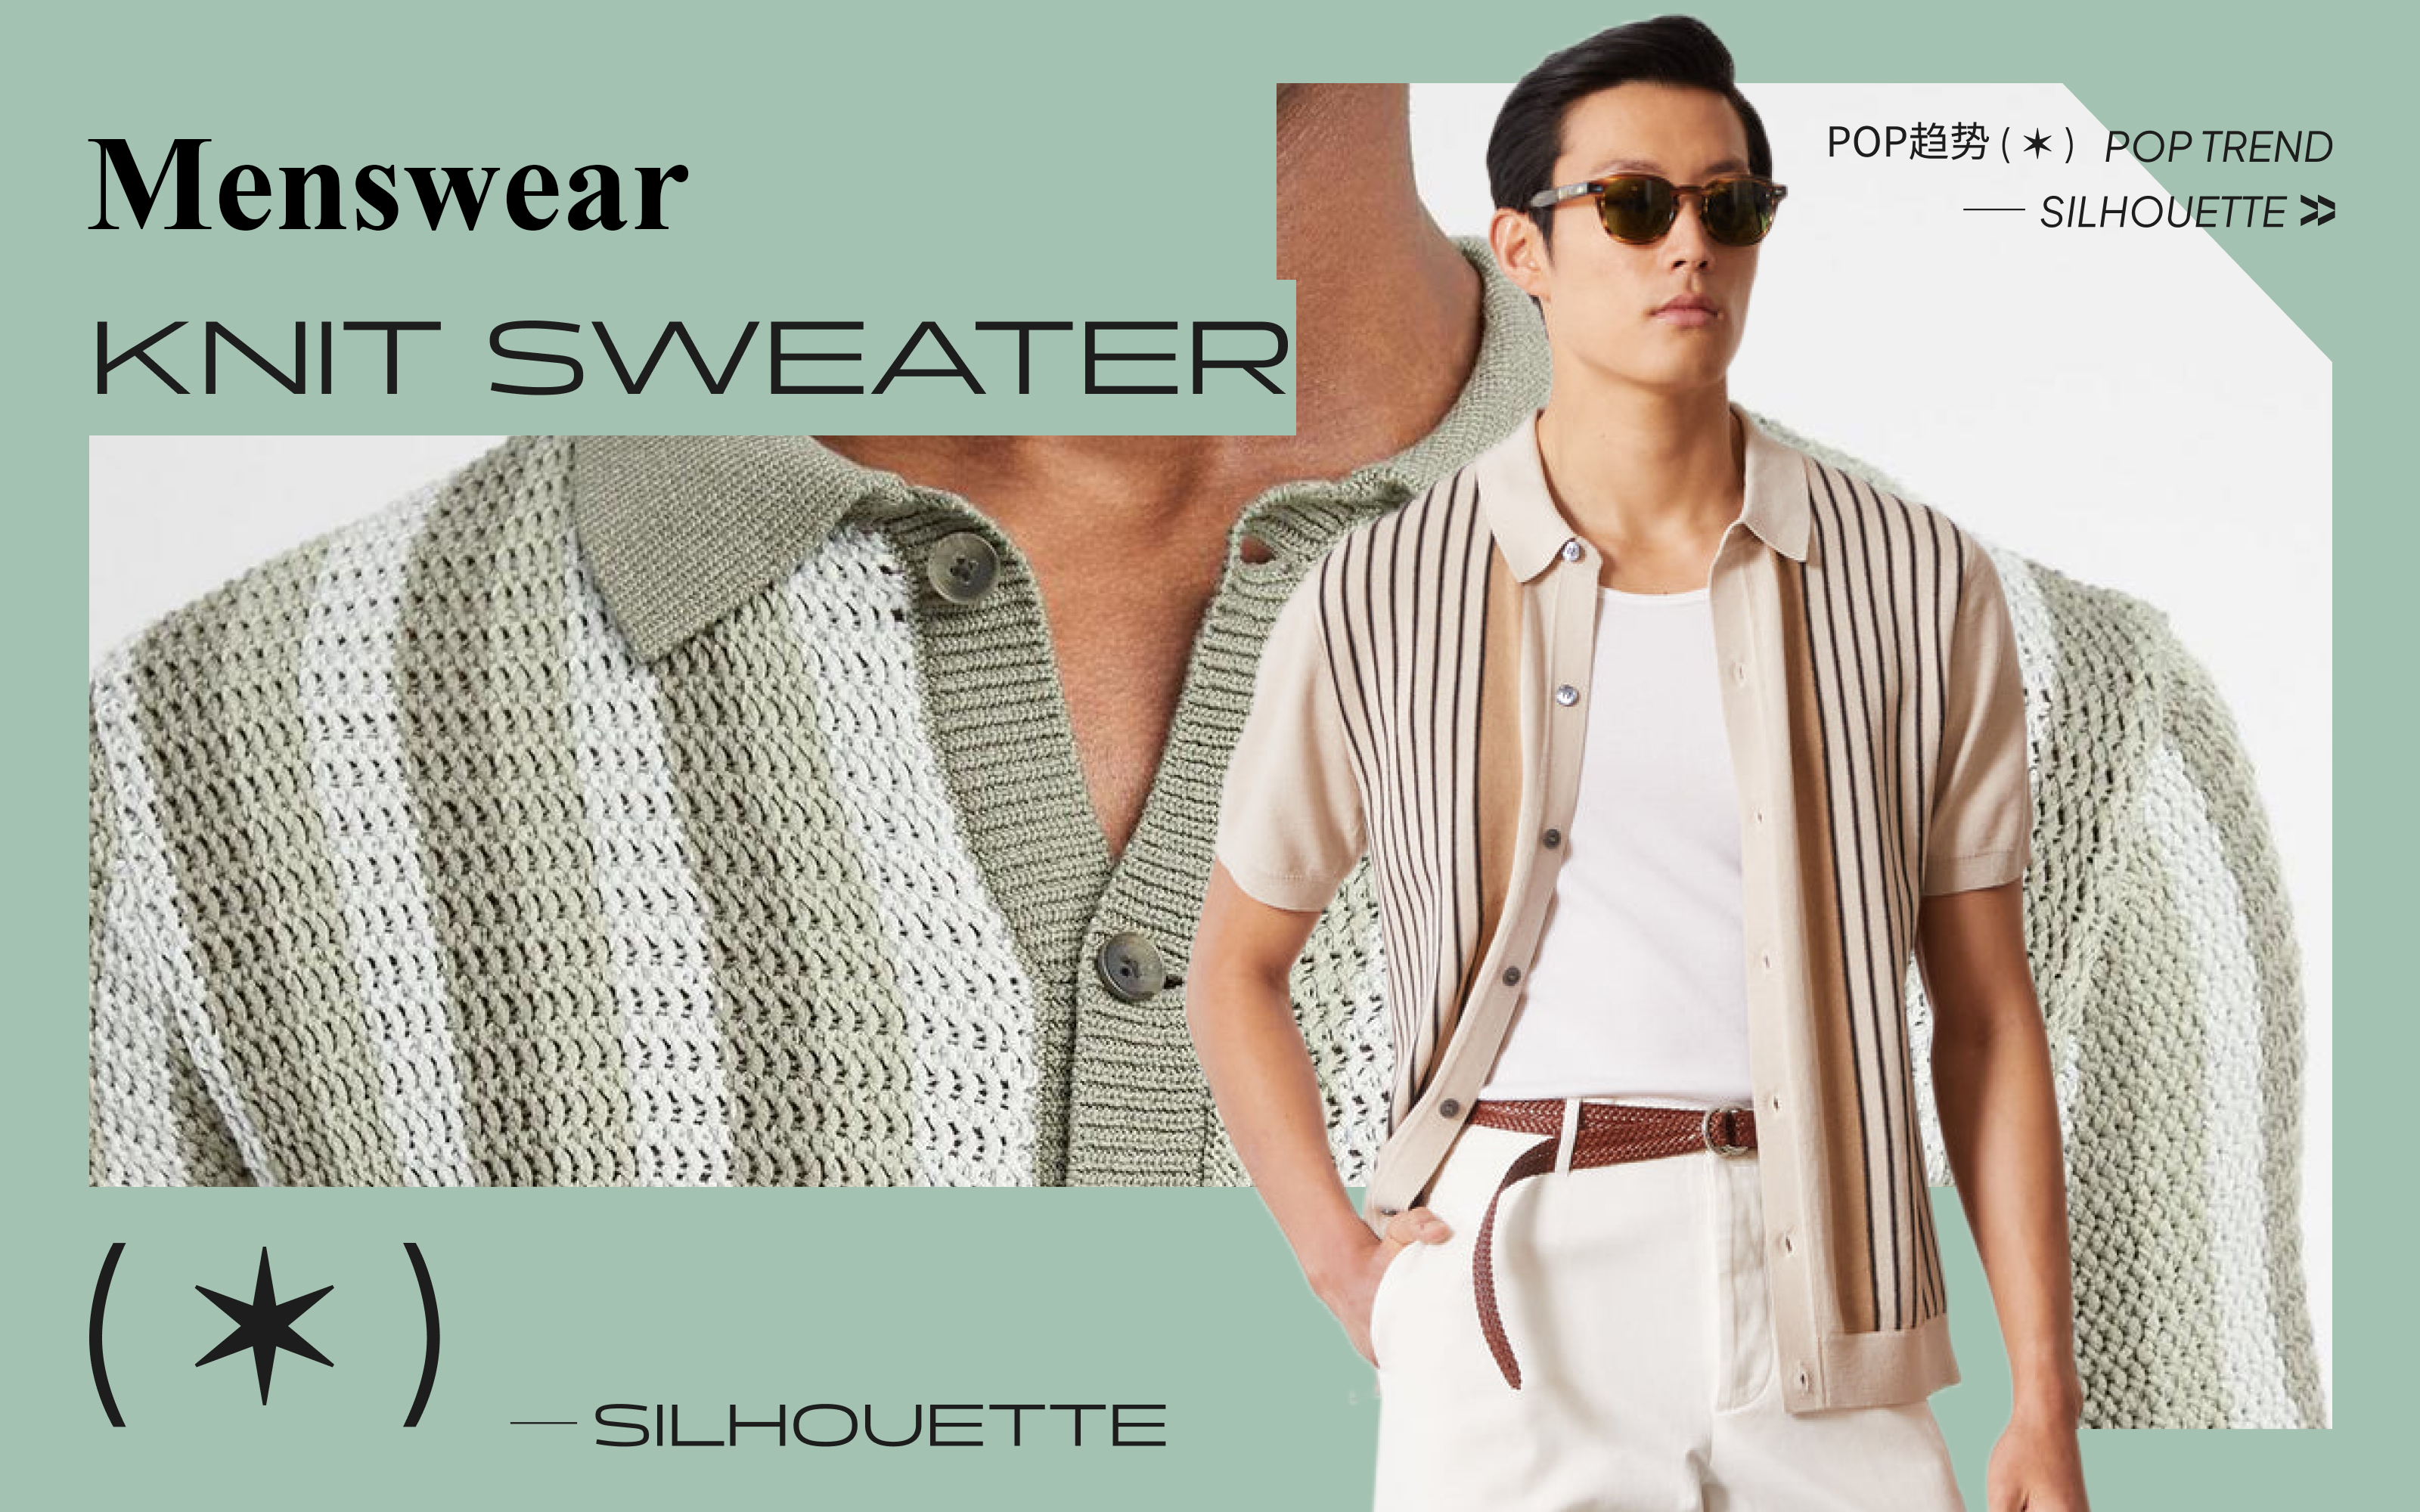 Diverse Cardigan -- The Silhouette Trend for Men's Knitwear